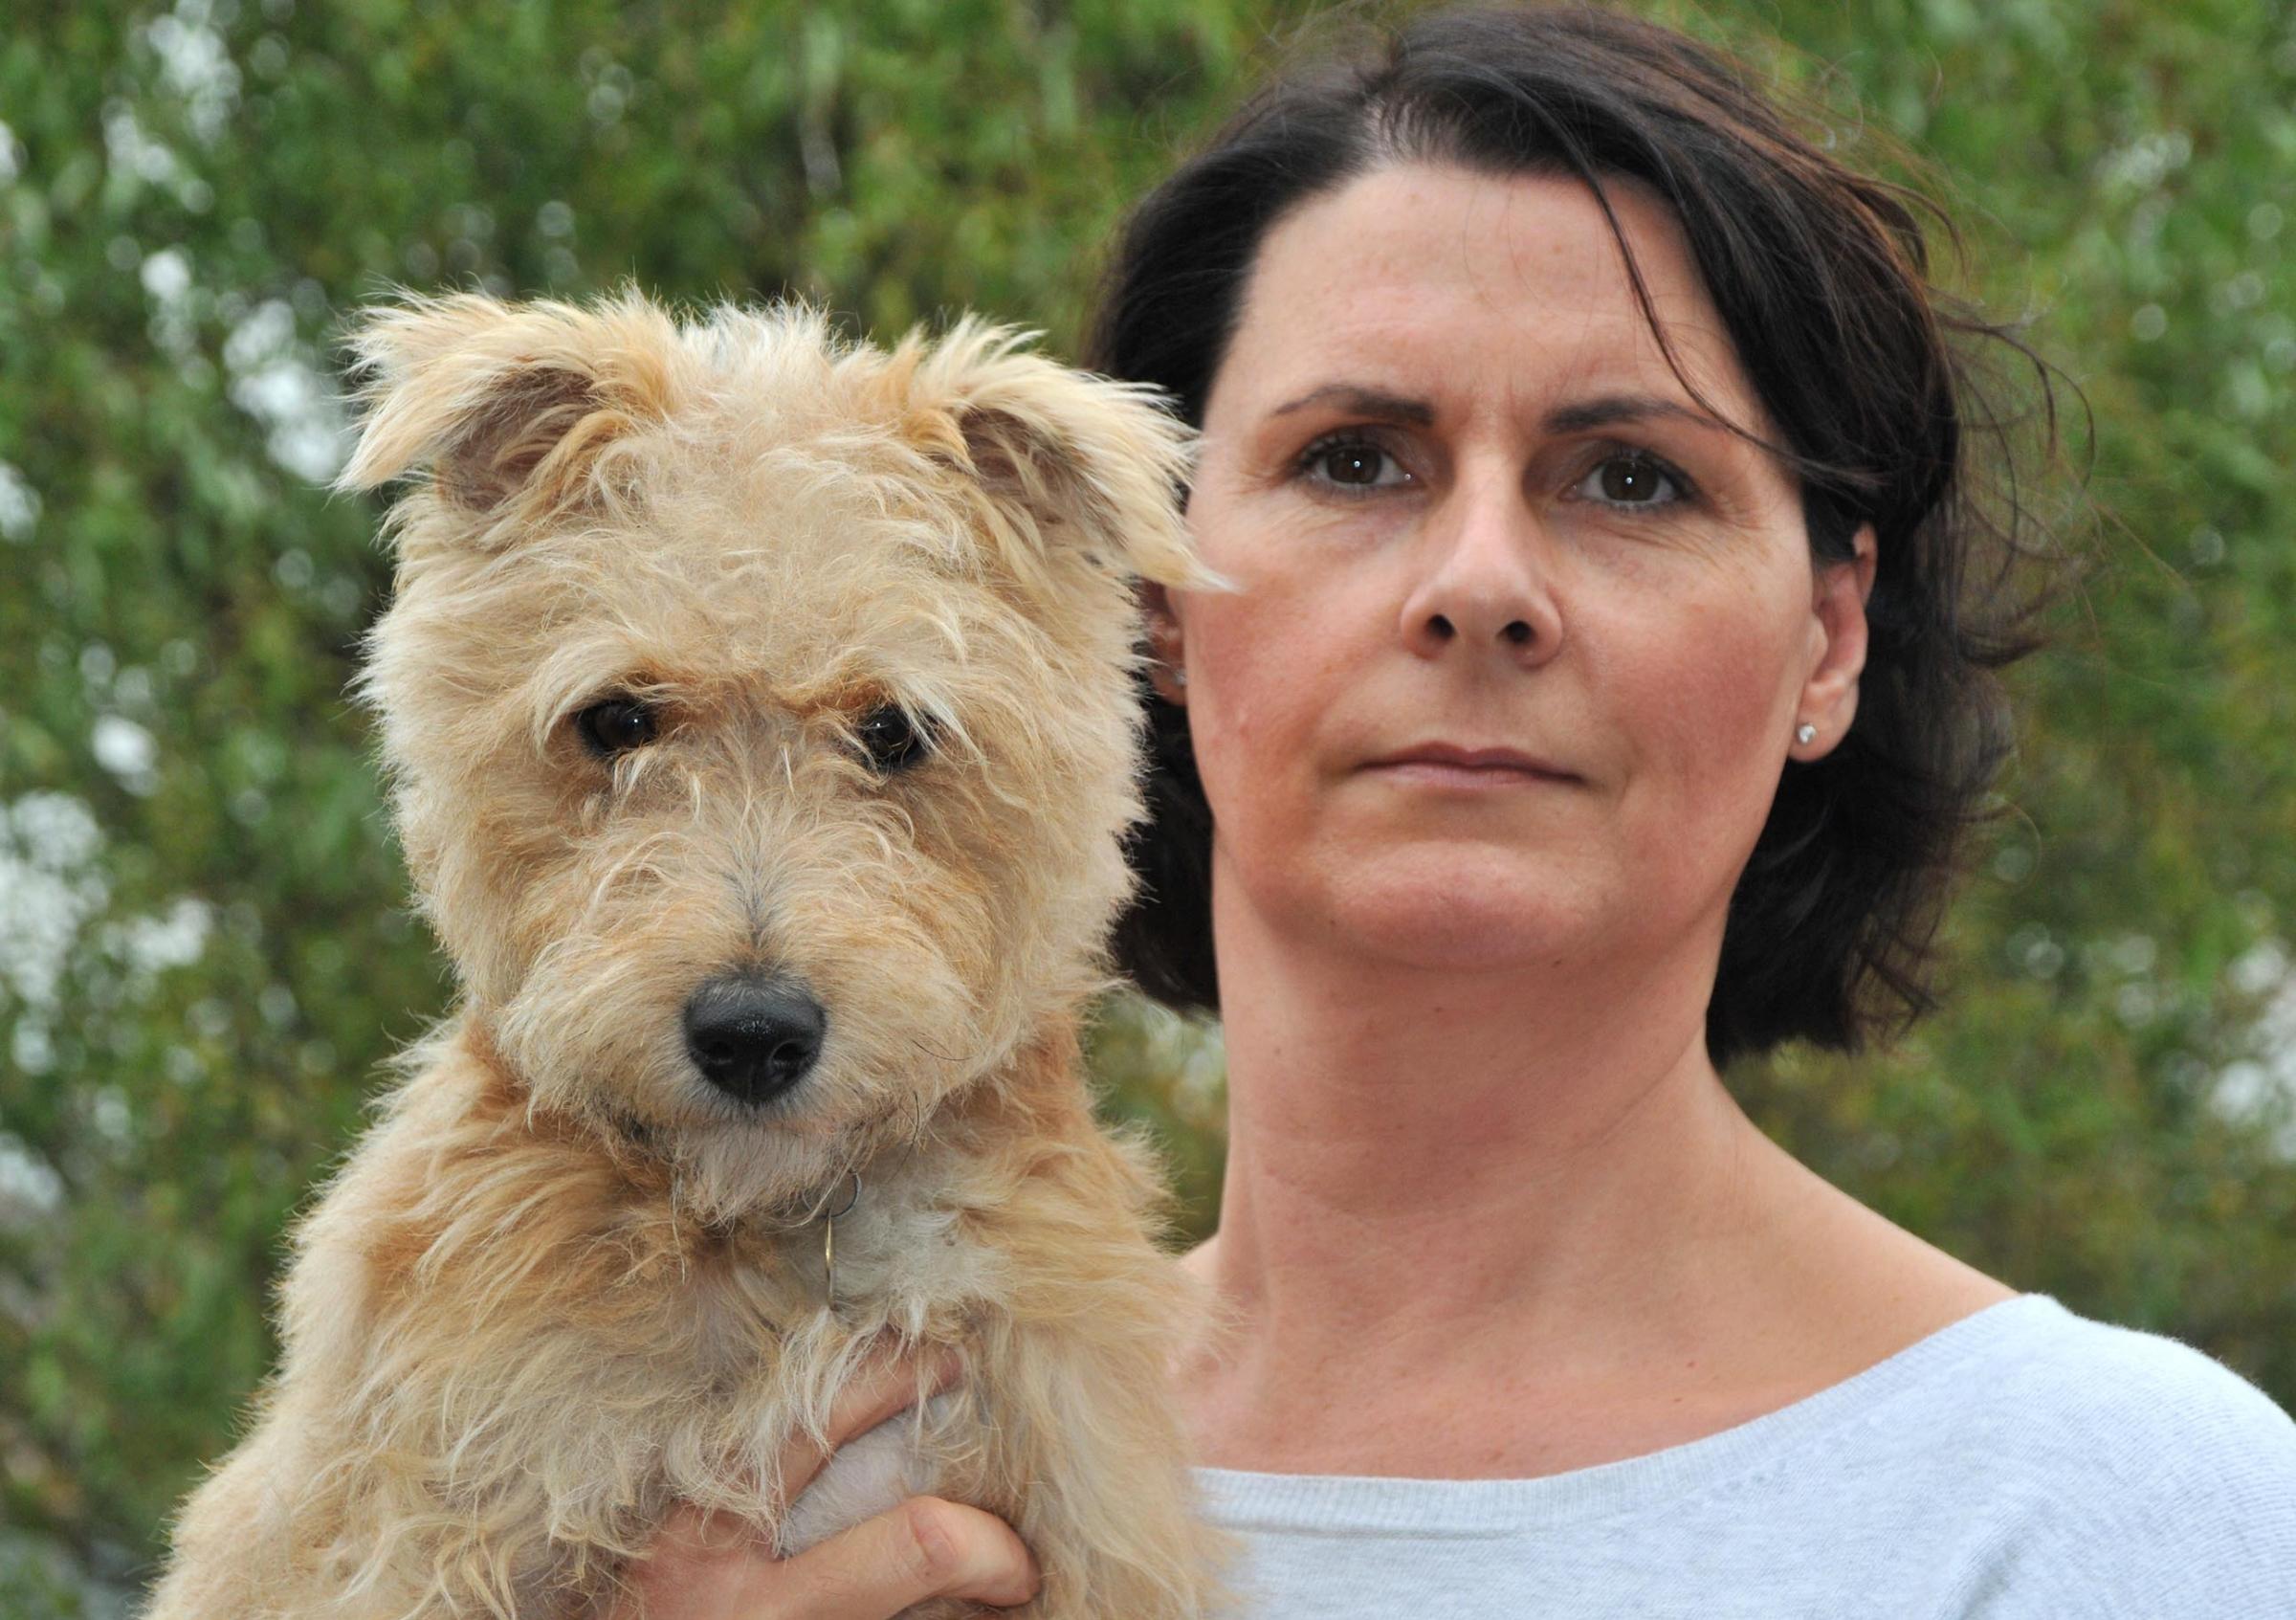 Pictured is Carolyn Rennie with her dog Jess which was savaged by a dog matching the description of one involved in a previous attack on another dog. - 4408181